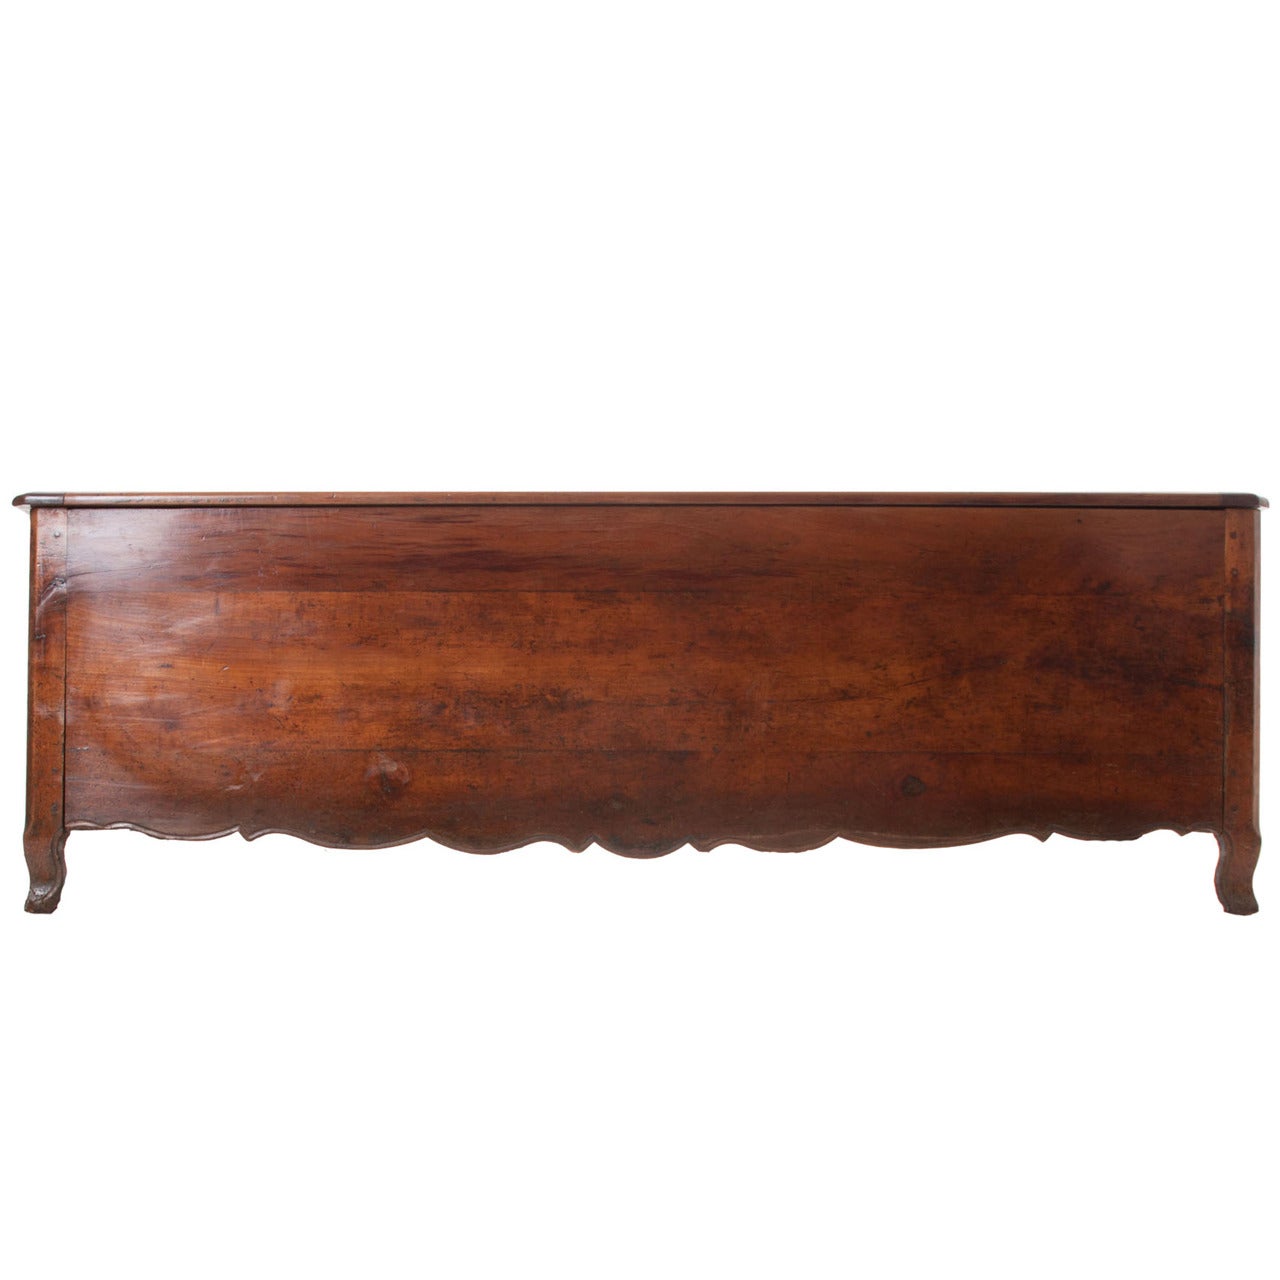 French 18th Century Louis XV Massive Coffer or Trunk from Brittany